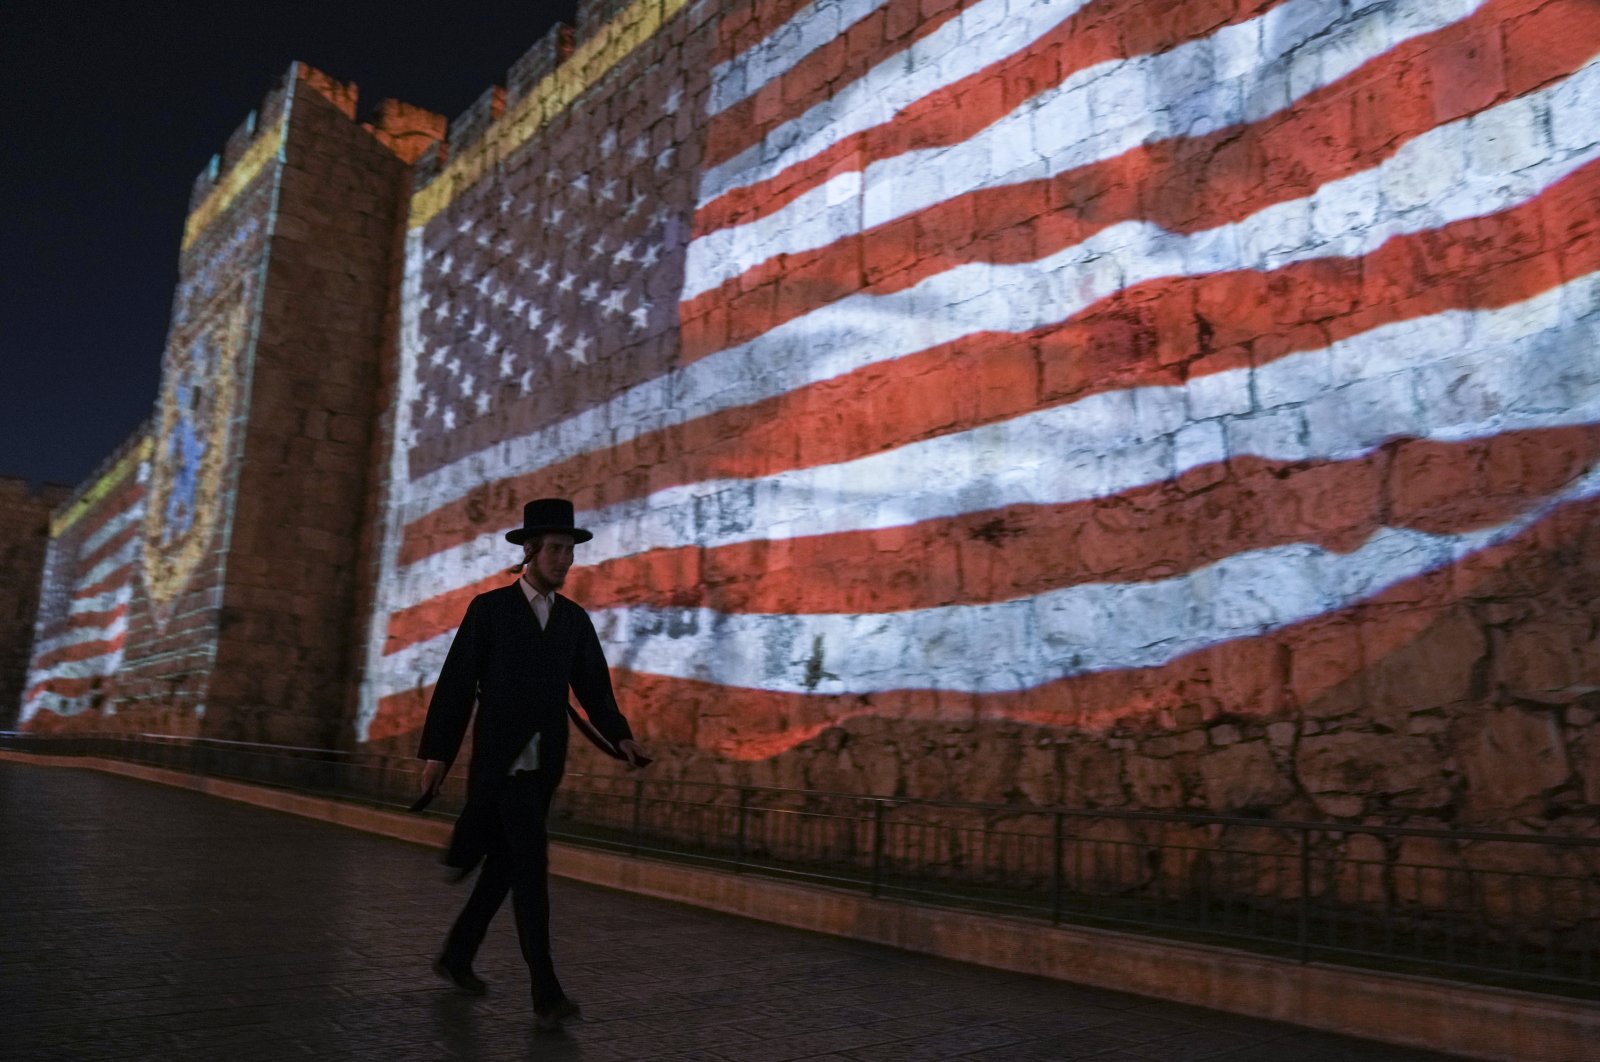 An image of the U.S. flag is projected on the walls of Jerusalem&#039;s Old City in honor of President Joe Biden&#039;s visit to Jerusalem, July 13, 2022. (AP Photo)